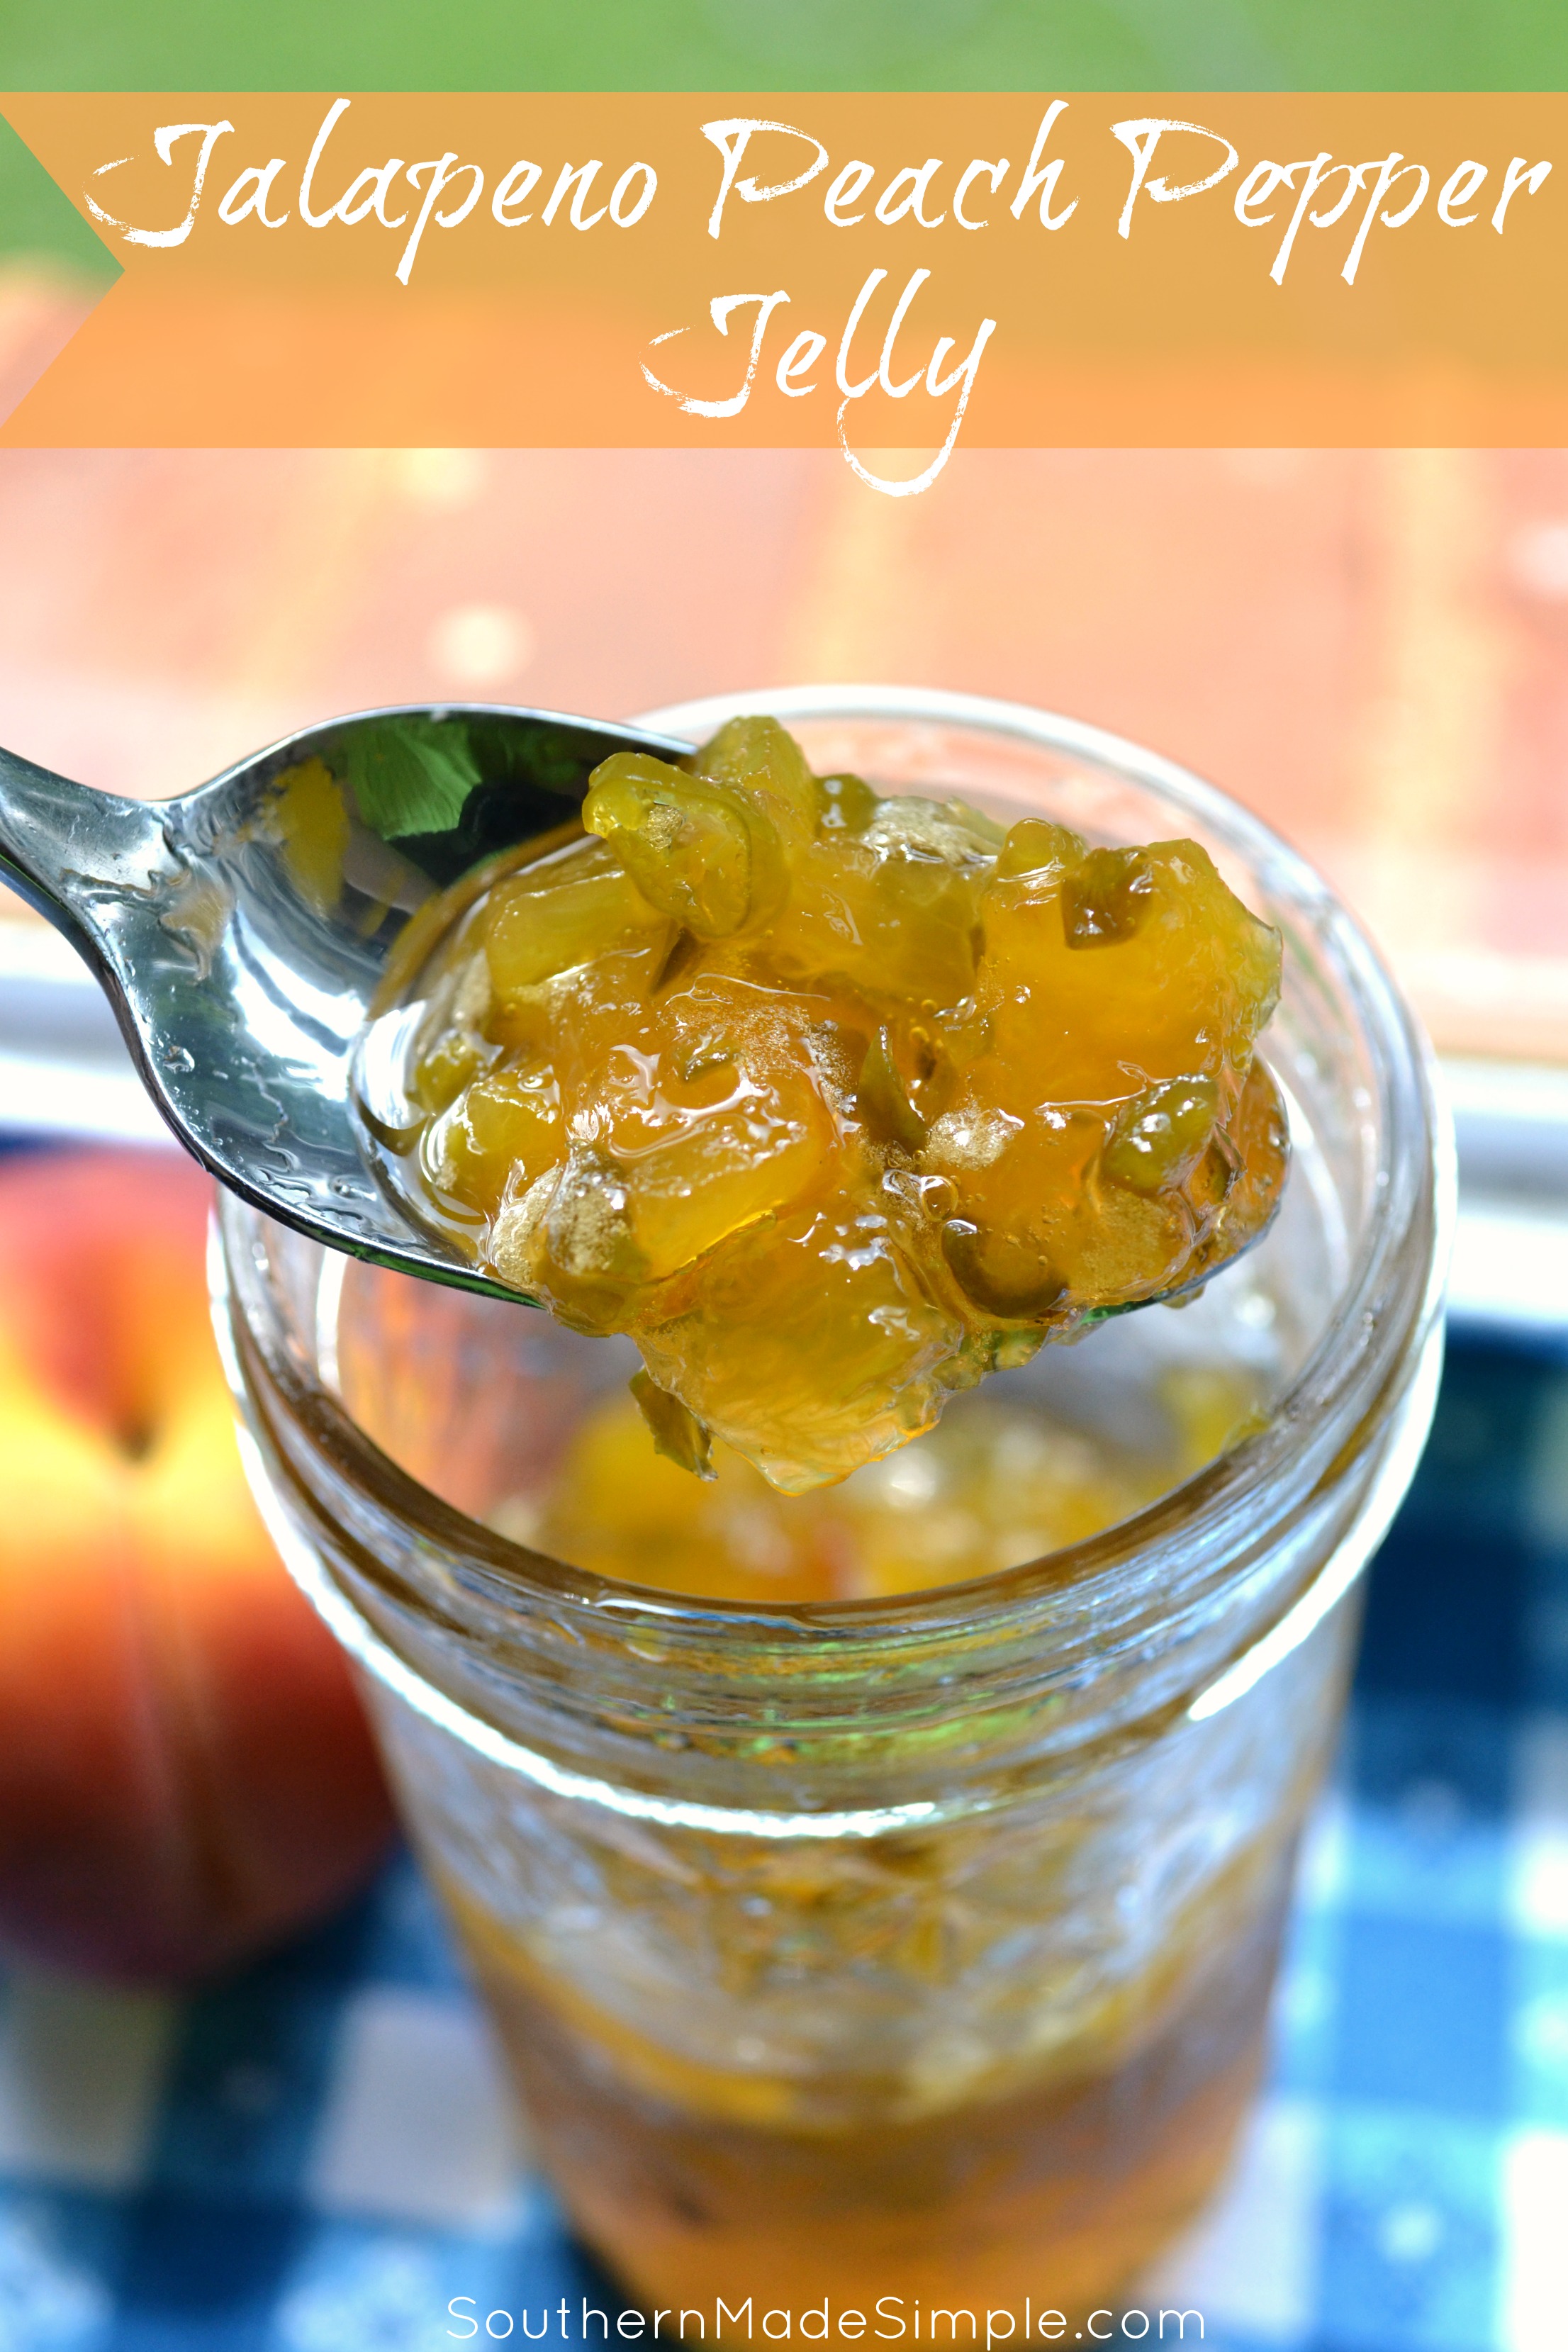 Jalapeno Peach Pepper Jelly - This recipe uses 3 different type of peppers, but you can easily substitute them to whatever you like. It has the perfect amount of heat and is AMAZING on just about anything!